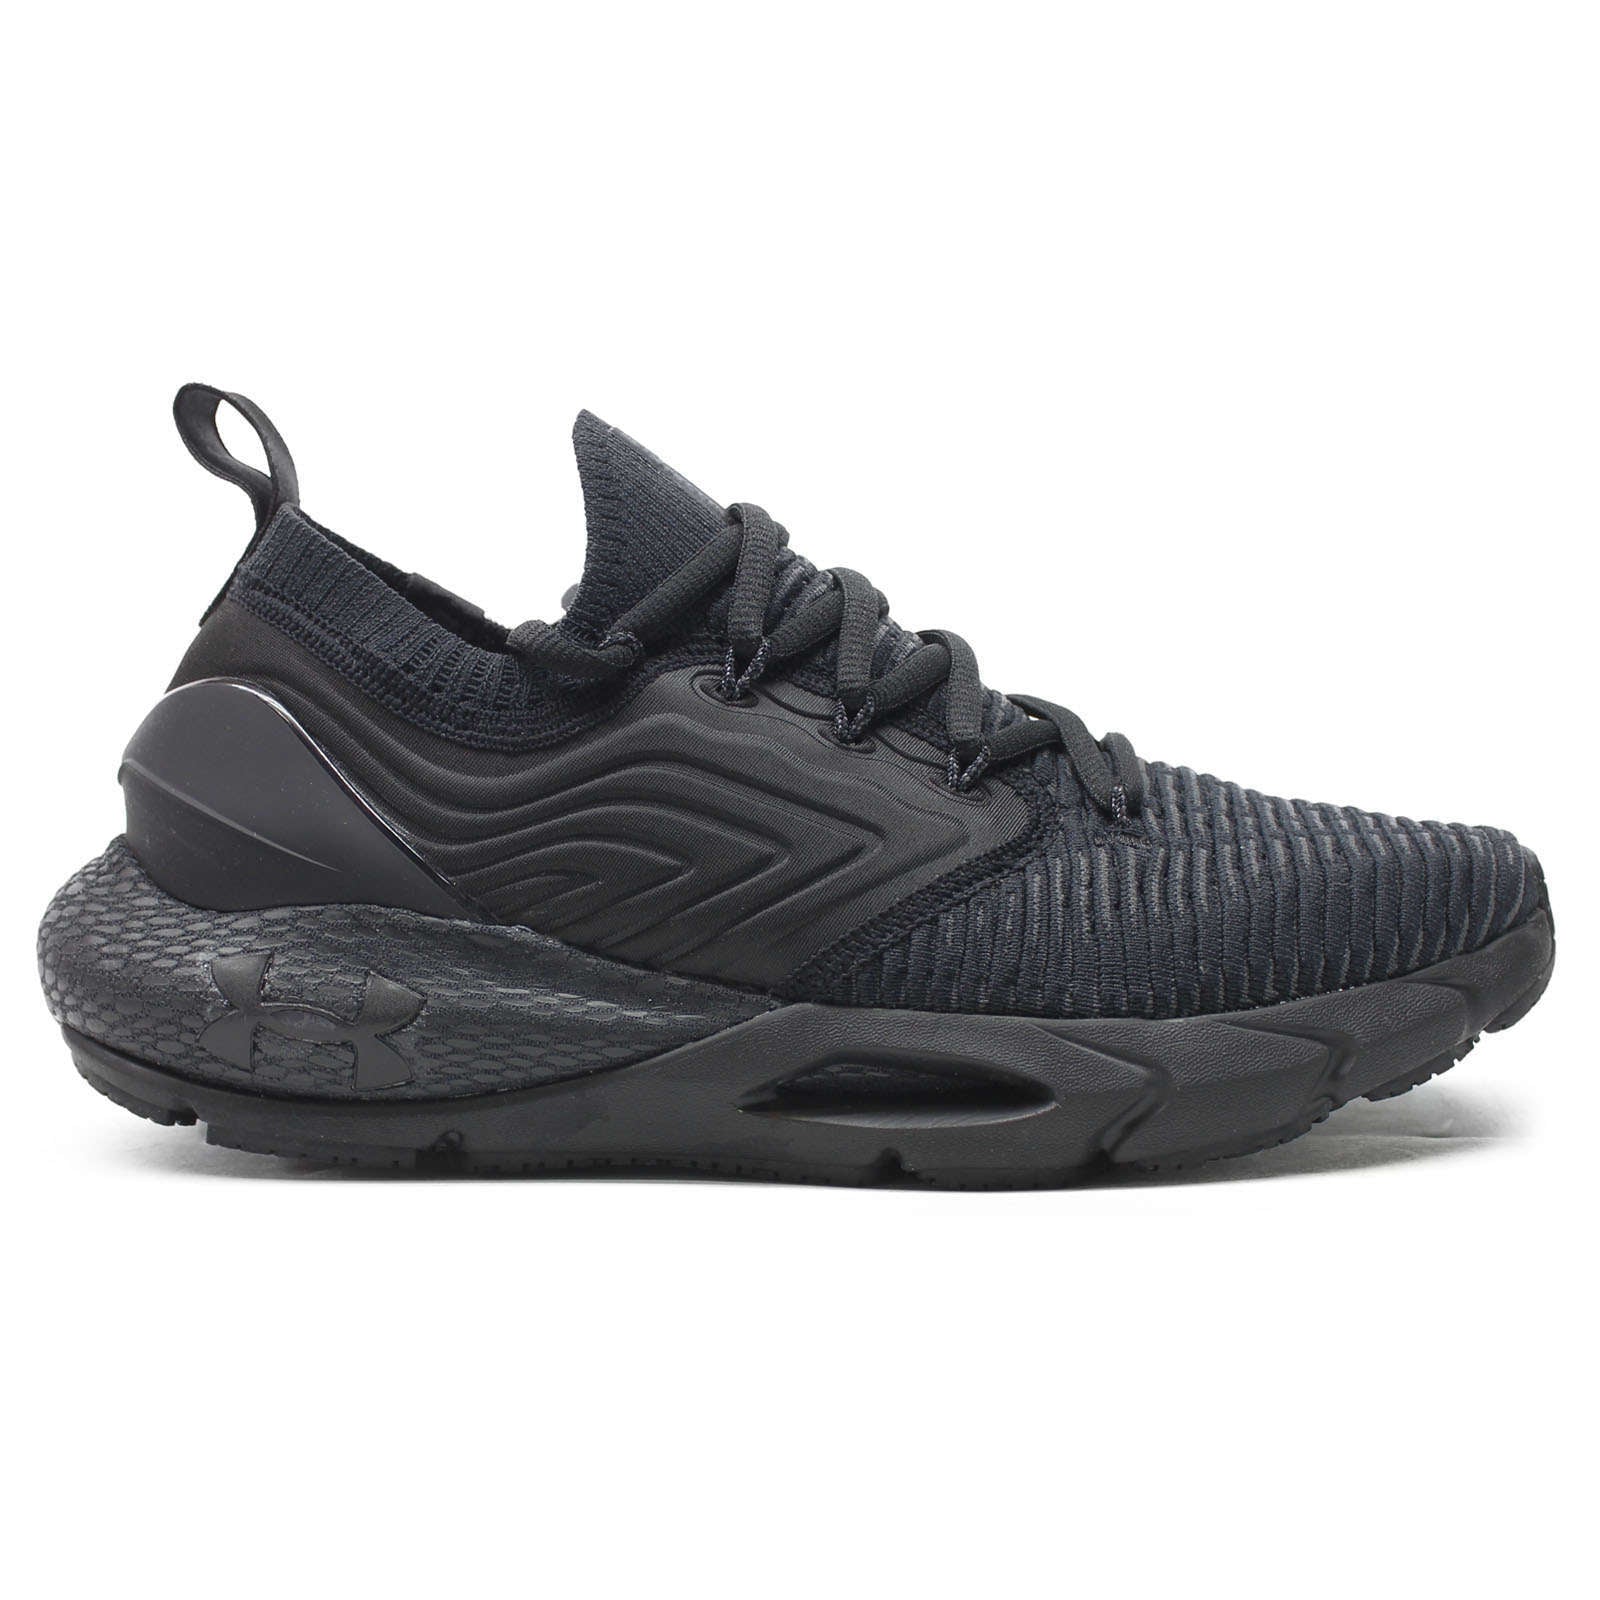 Under Armour HOVR Phantom 2 INKNT Synthetic Textile Men's Low-Top Trainers#color_black black grey